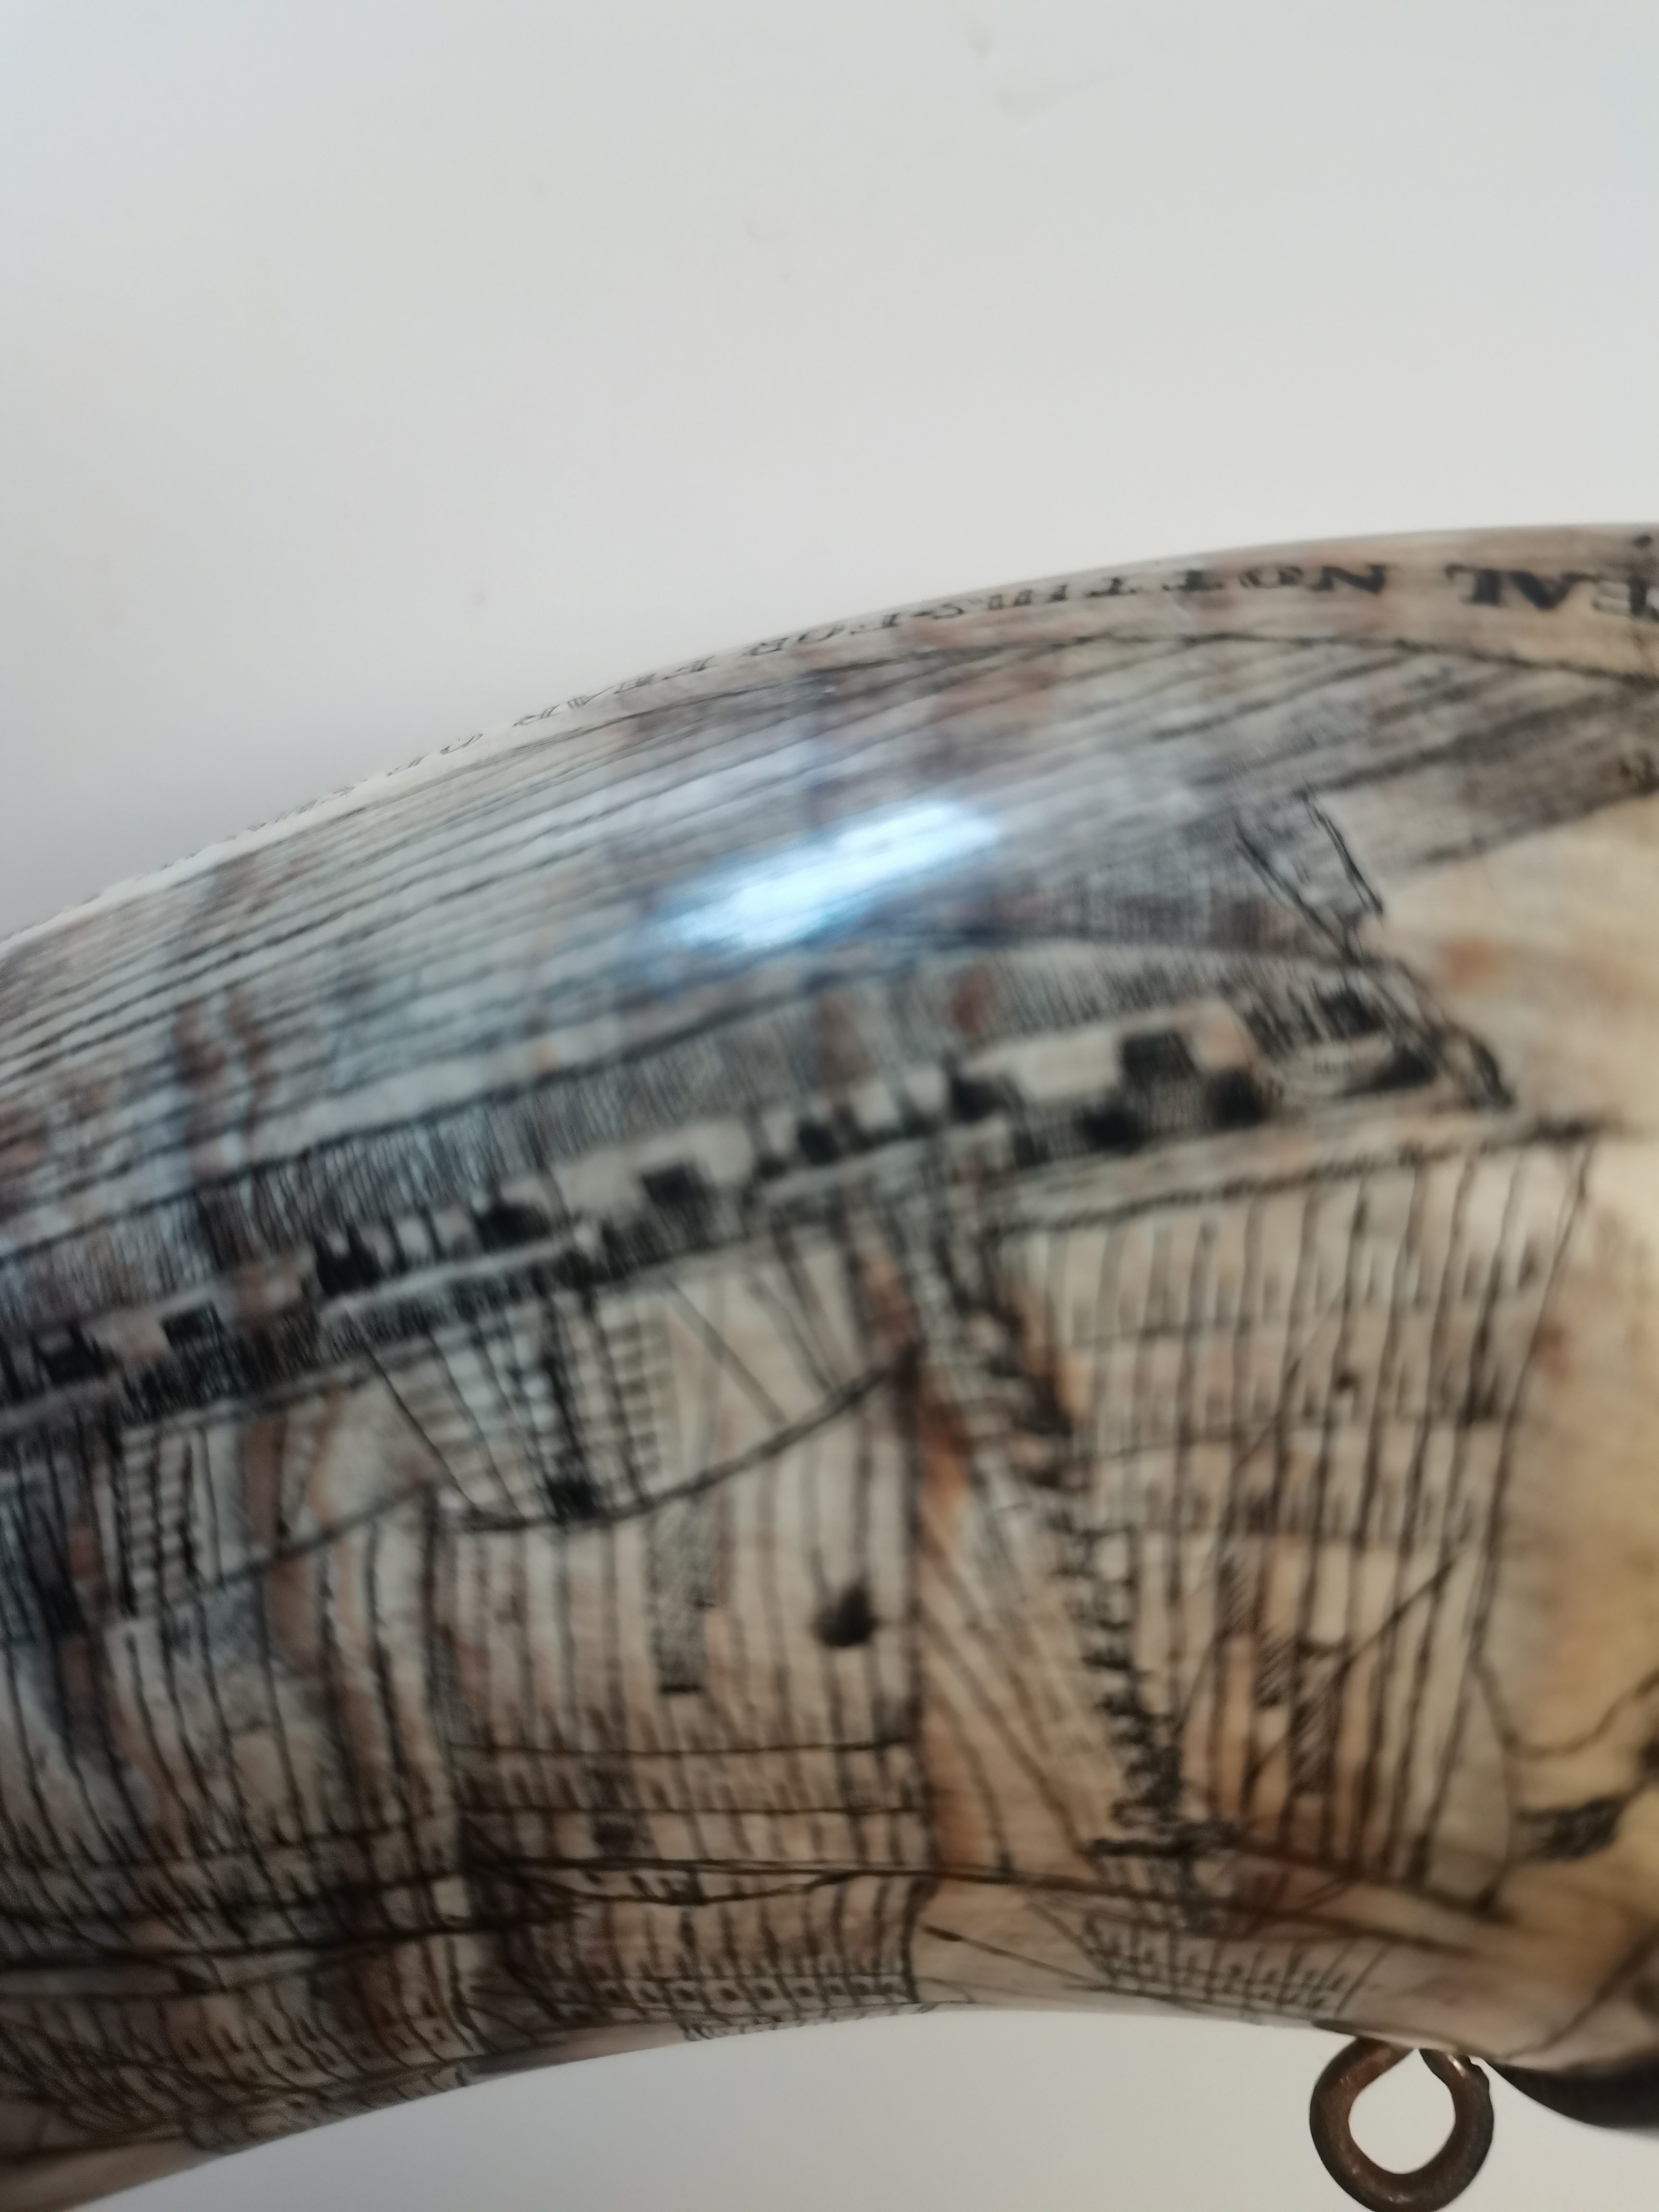 Scrimshaw style horn marking 1785 HMS DIDO - Image 7 of 8